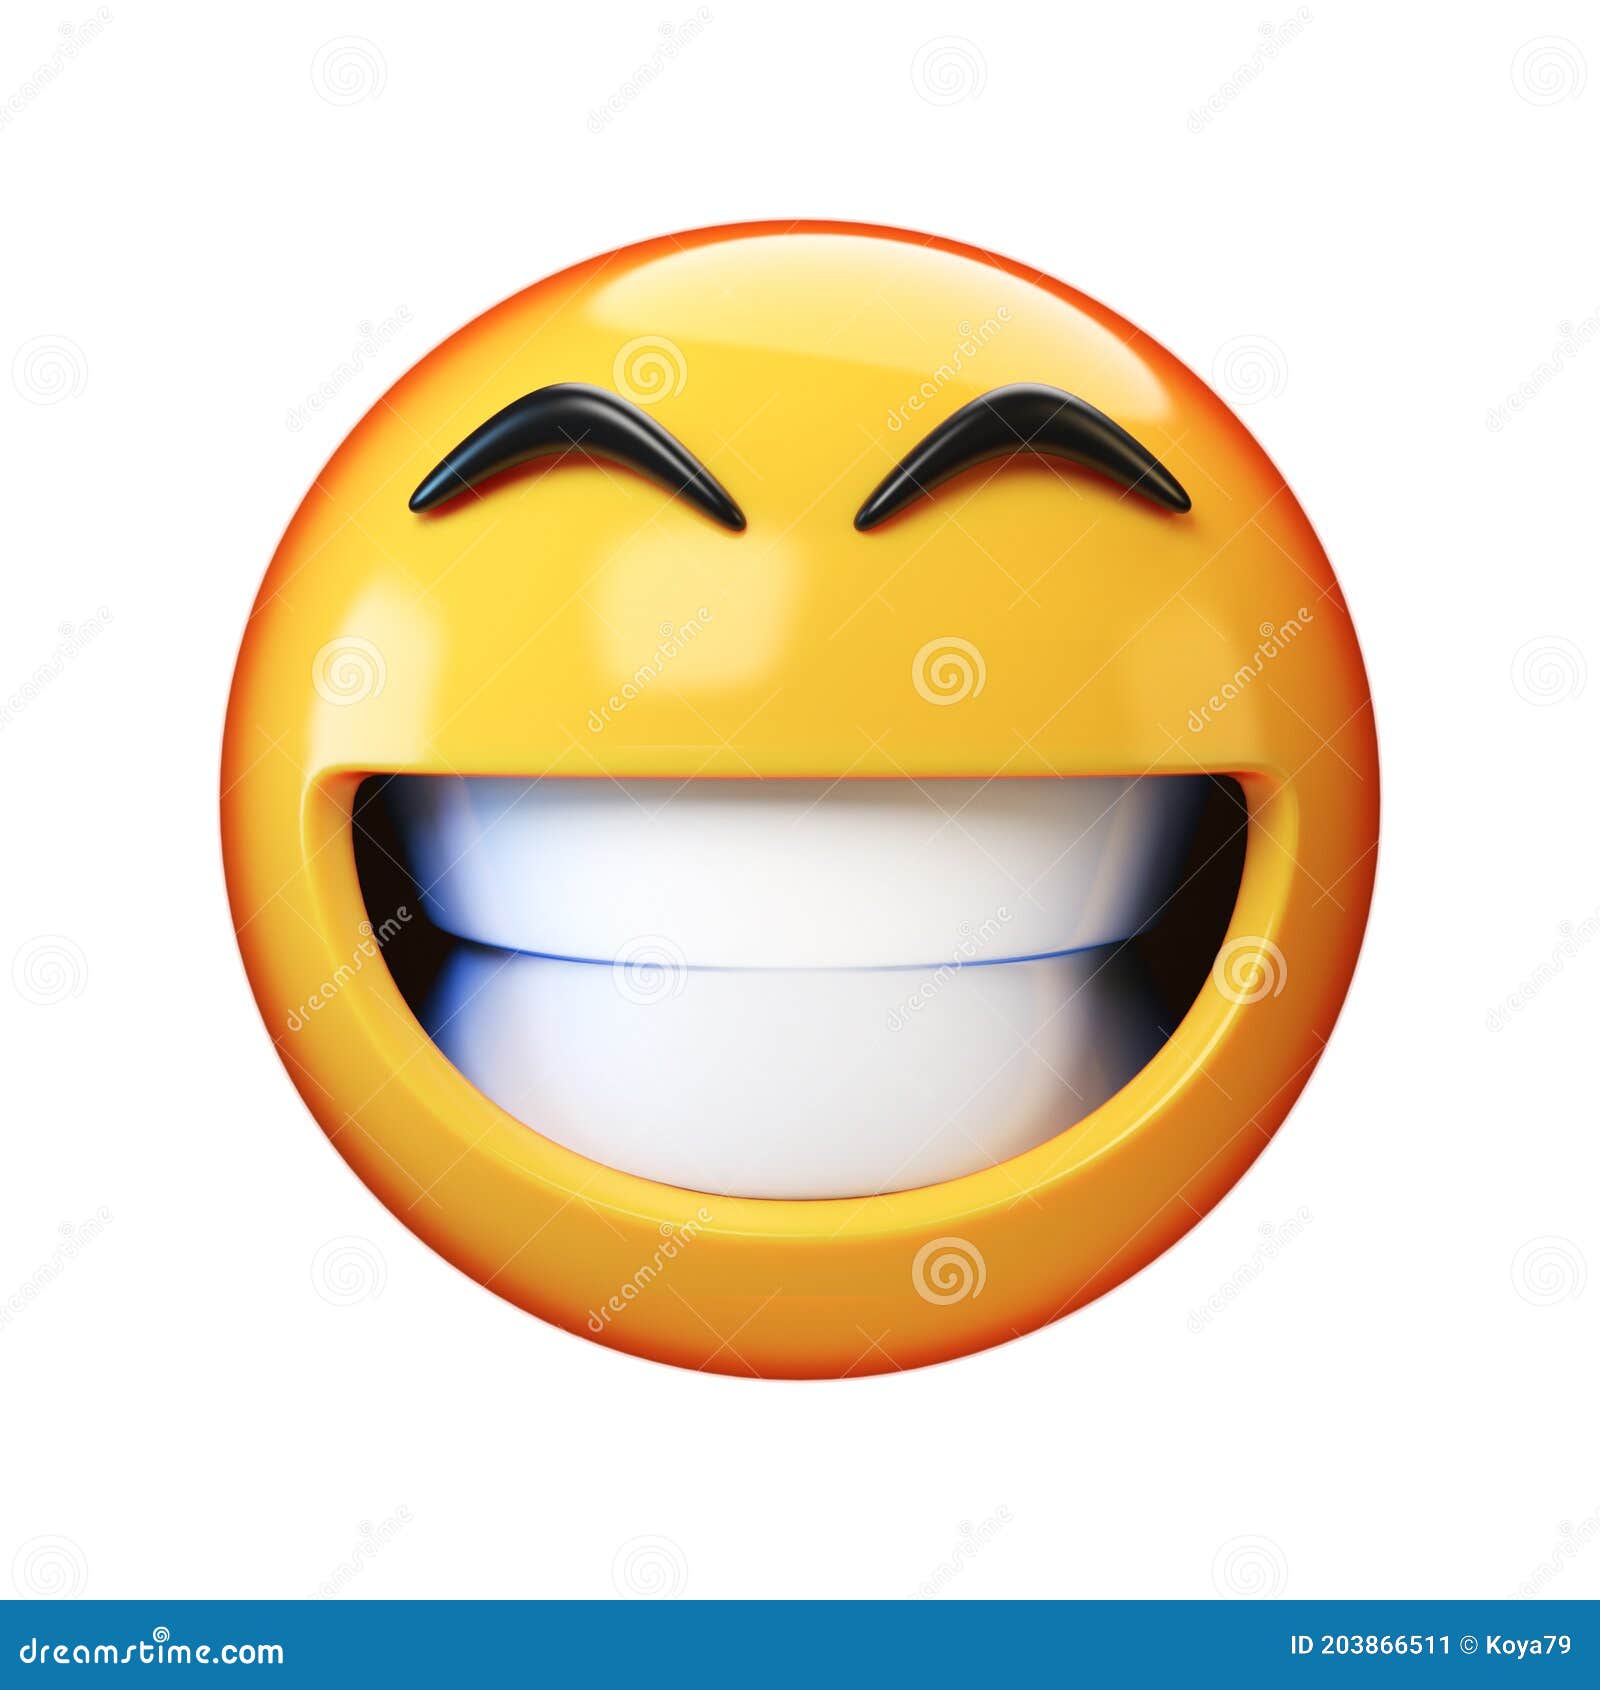 3dRose lsp_265895_1 Single Toggle Switch face picture of happy emoji on white background